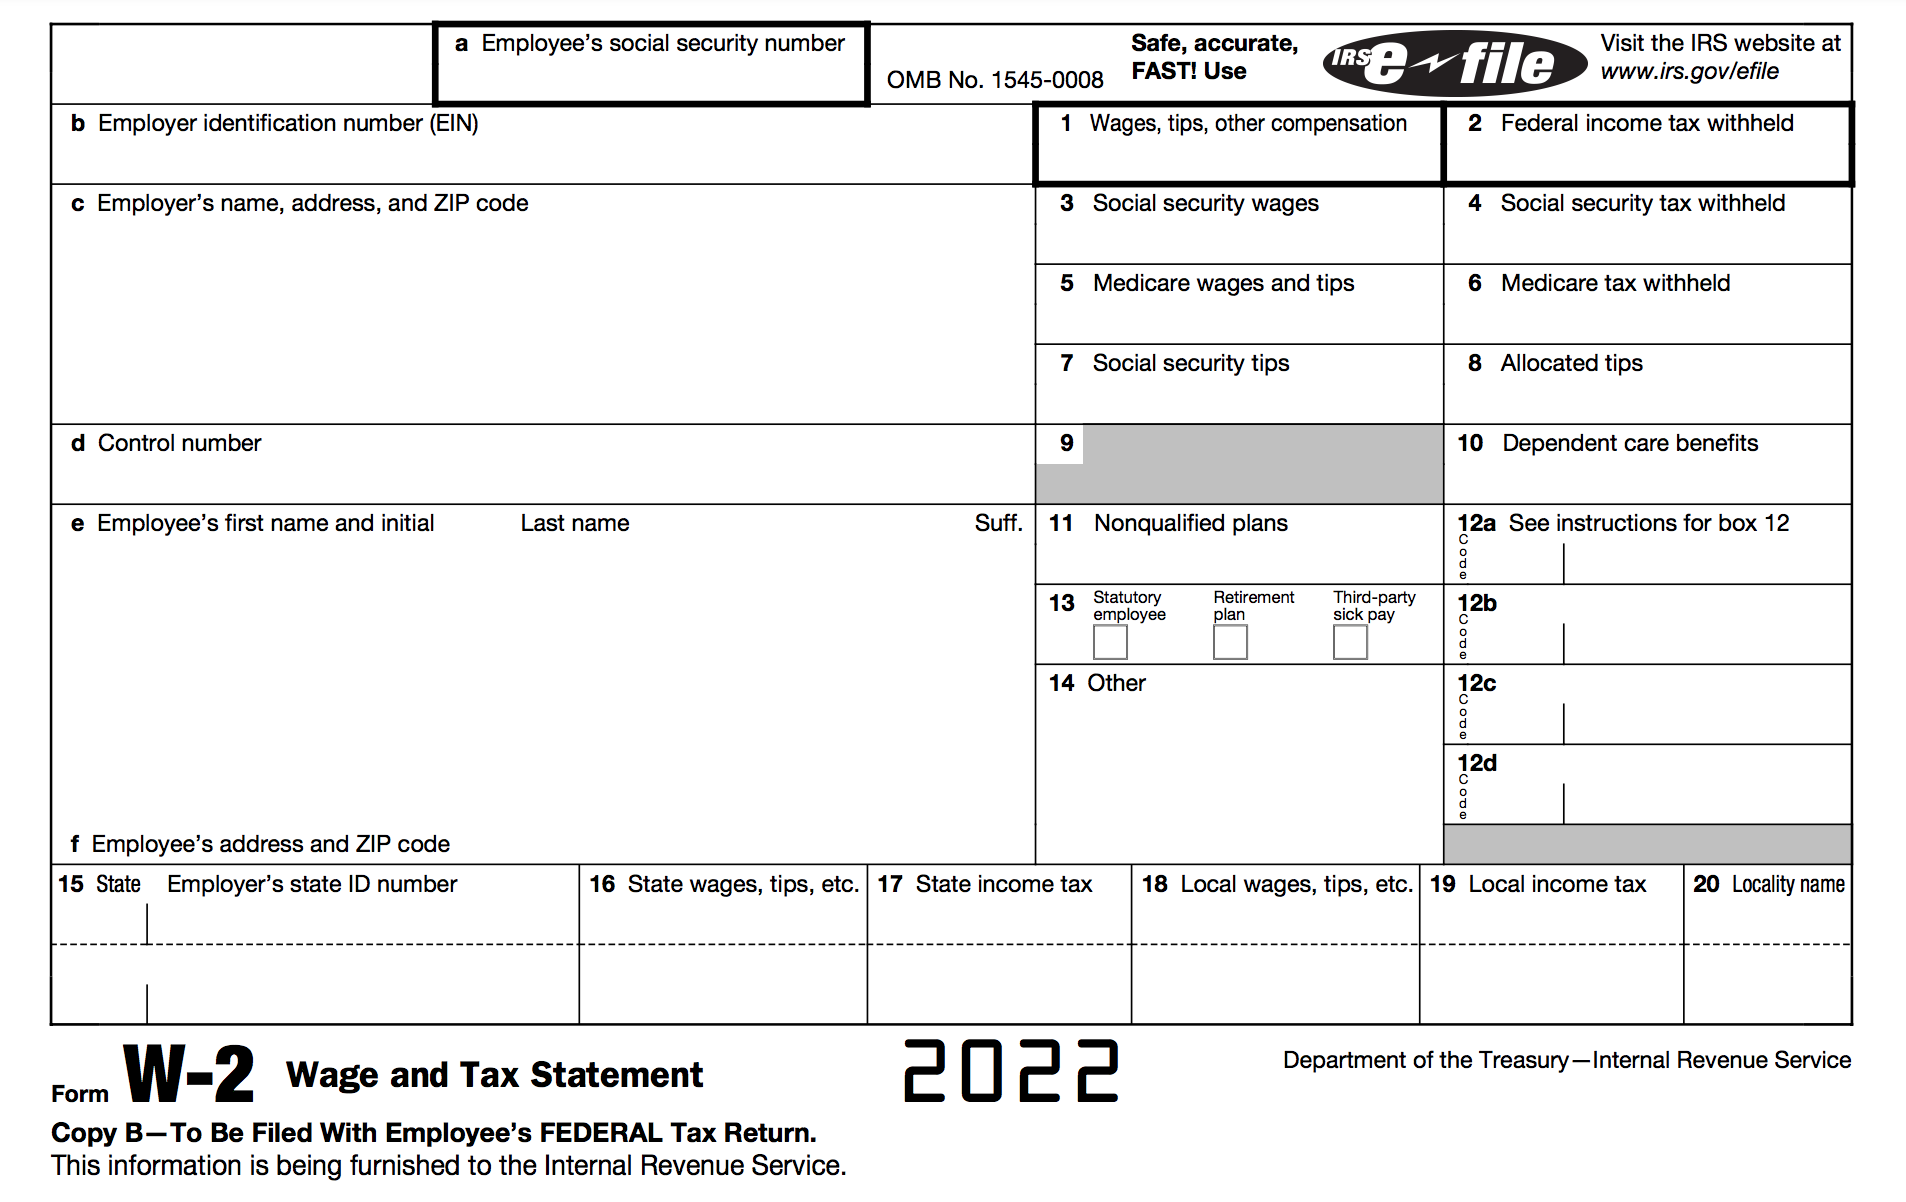 How To Fill Out A W-2 Tax Form | Smartasset within Fill W2 Form Online